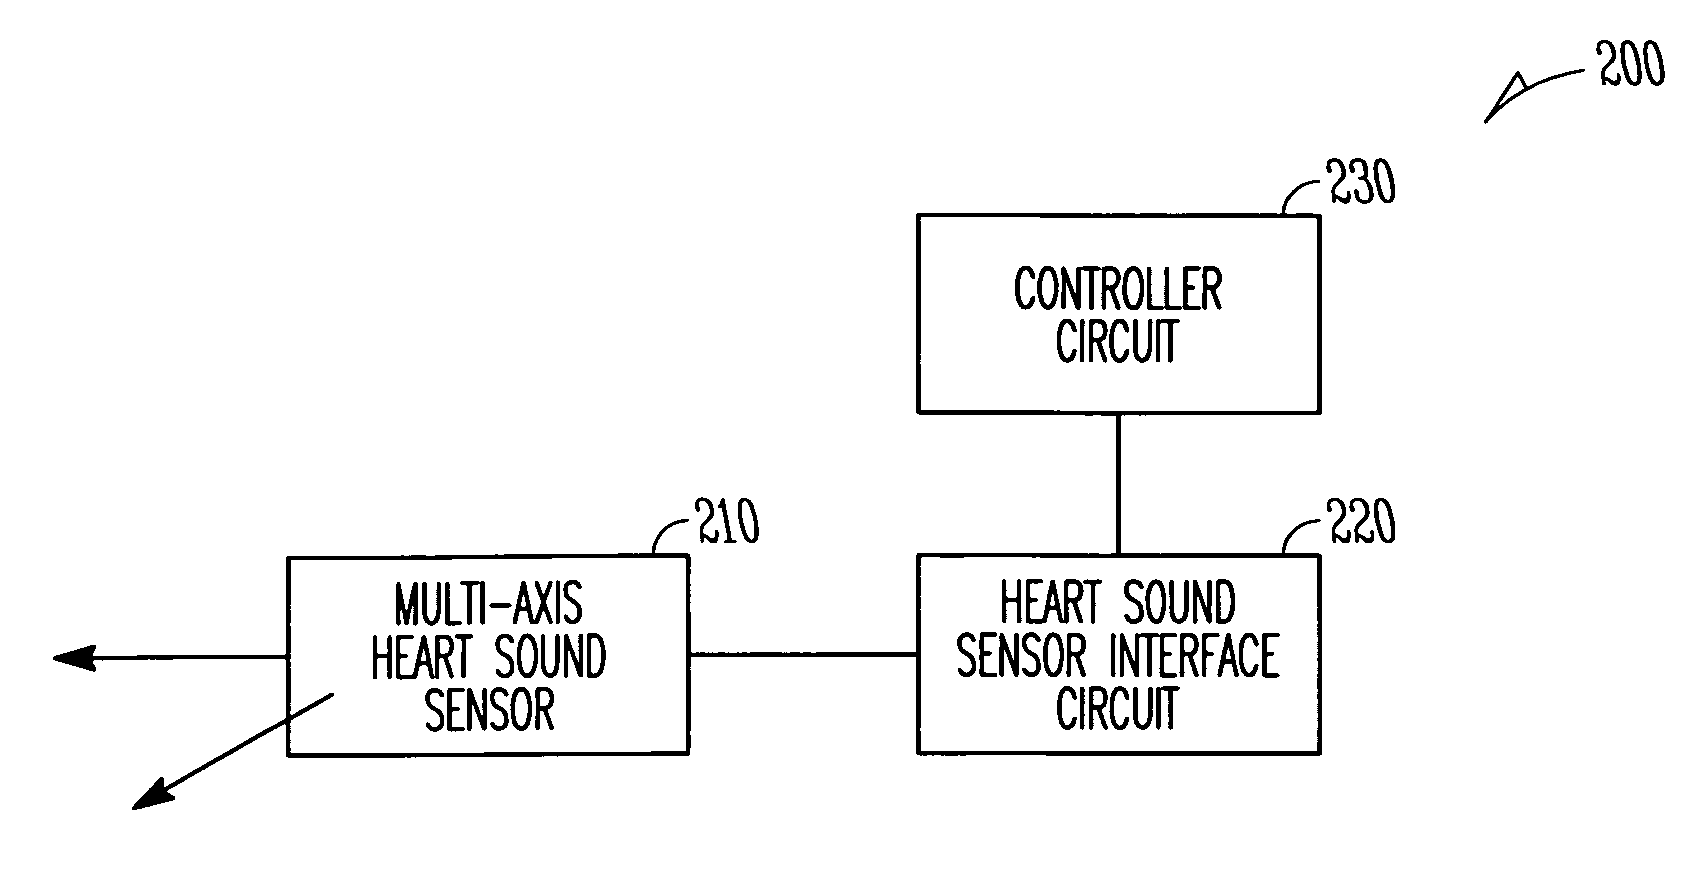 Systems and methods for multi-axis cardiac vibration measurements